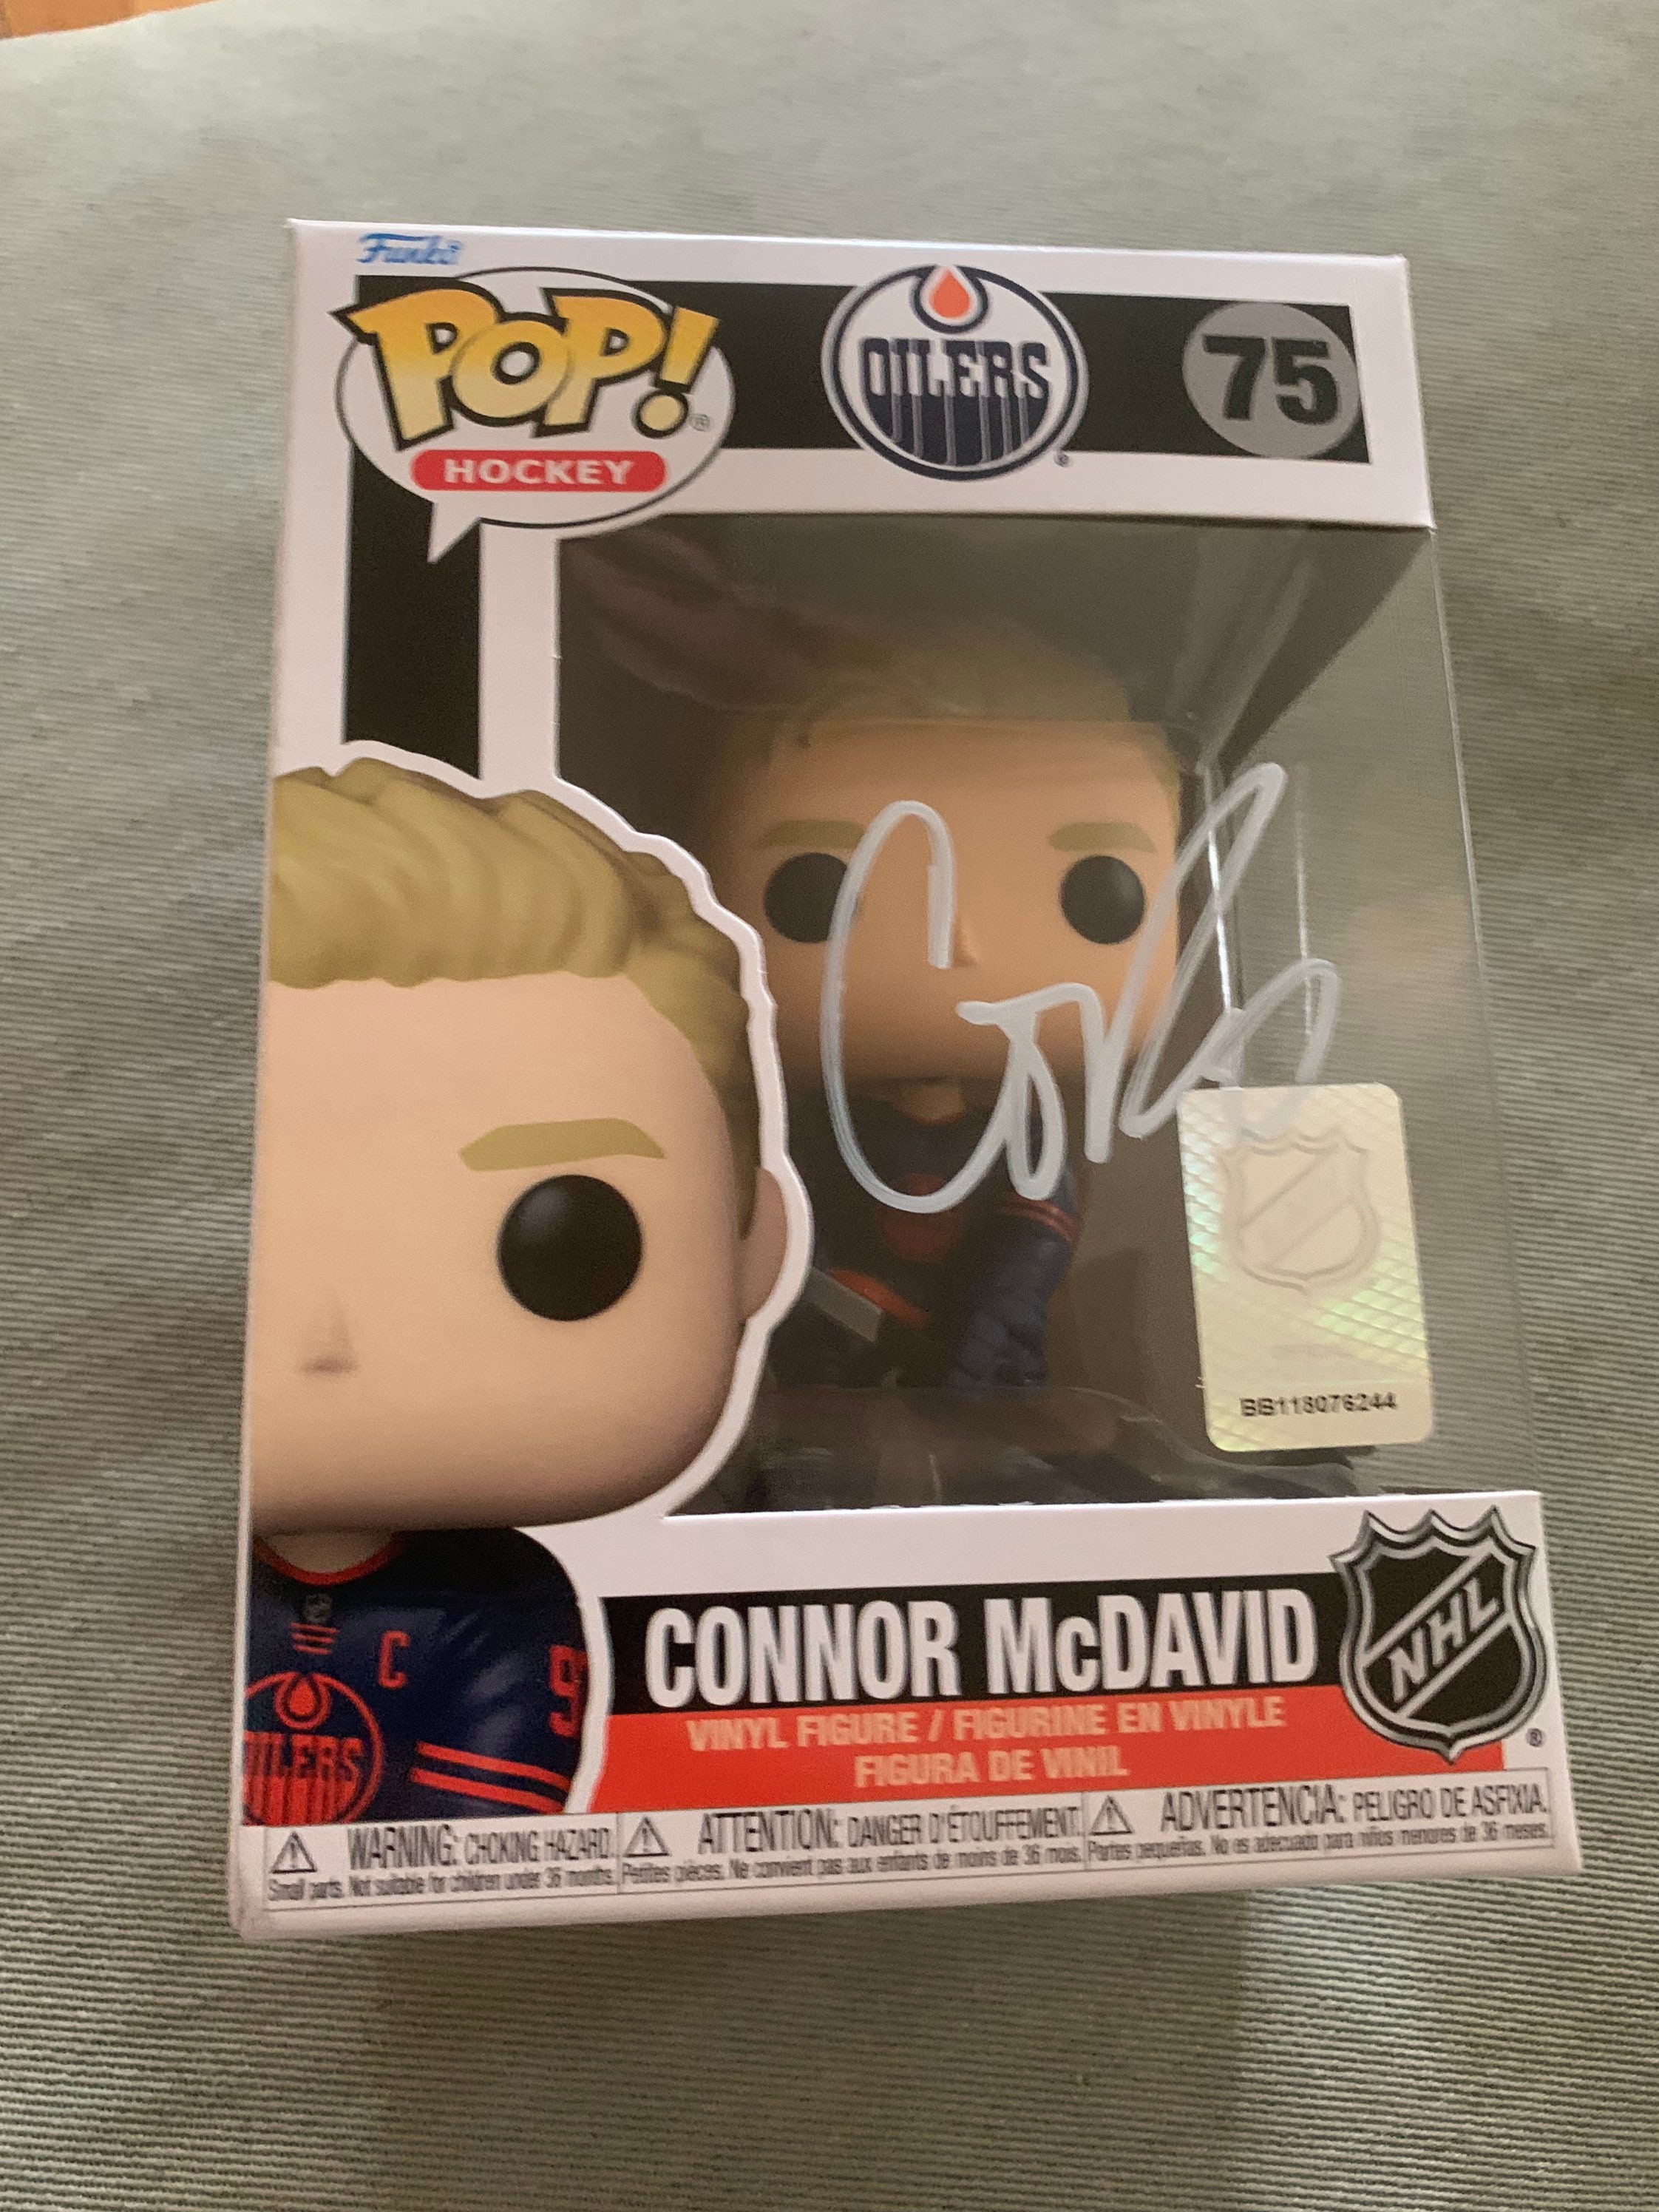 CONNOR MCDAVID SIGNED AUTHENTIC EDMONTON OILERS JERSEY WITH JSA LETTER +